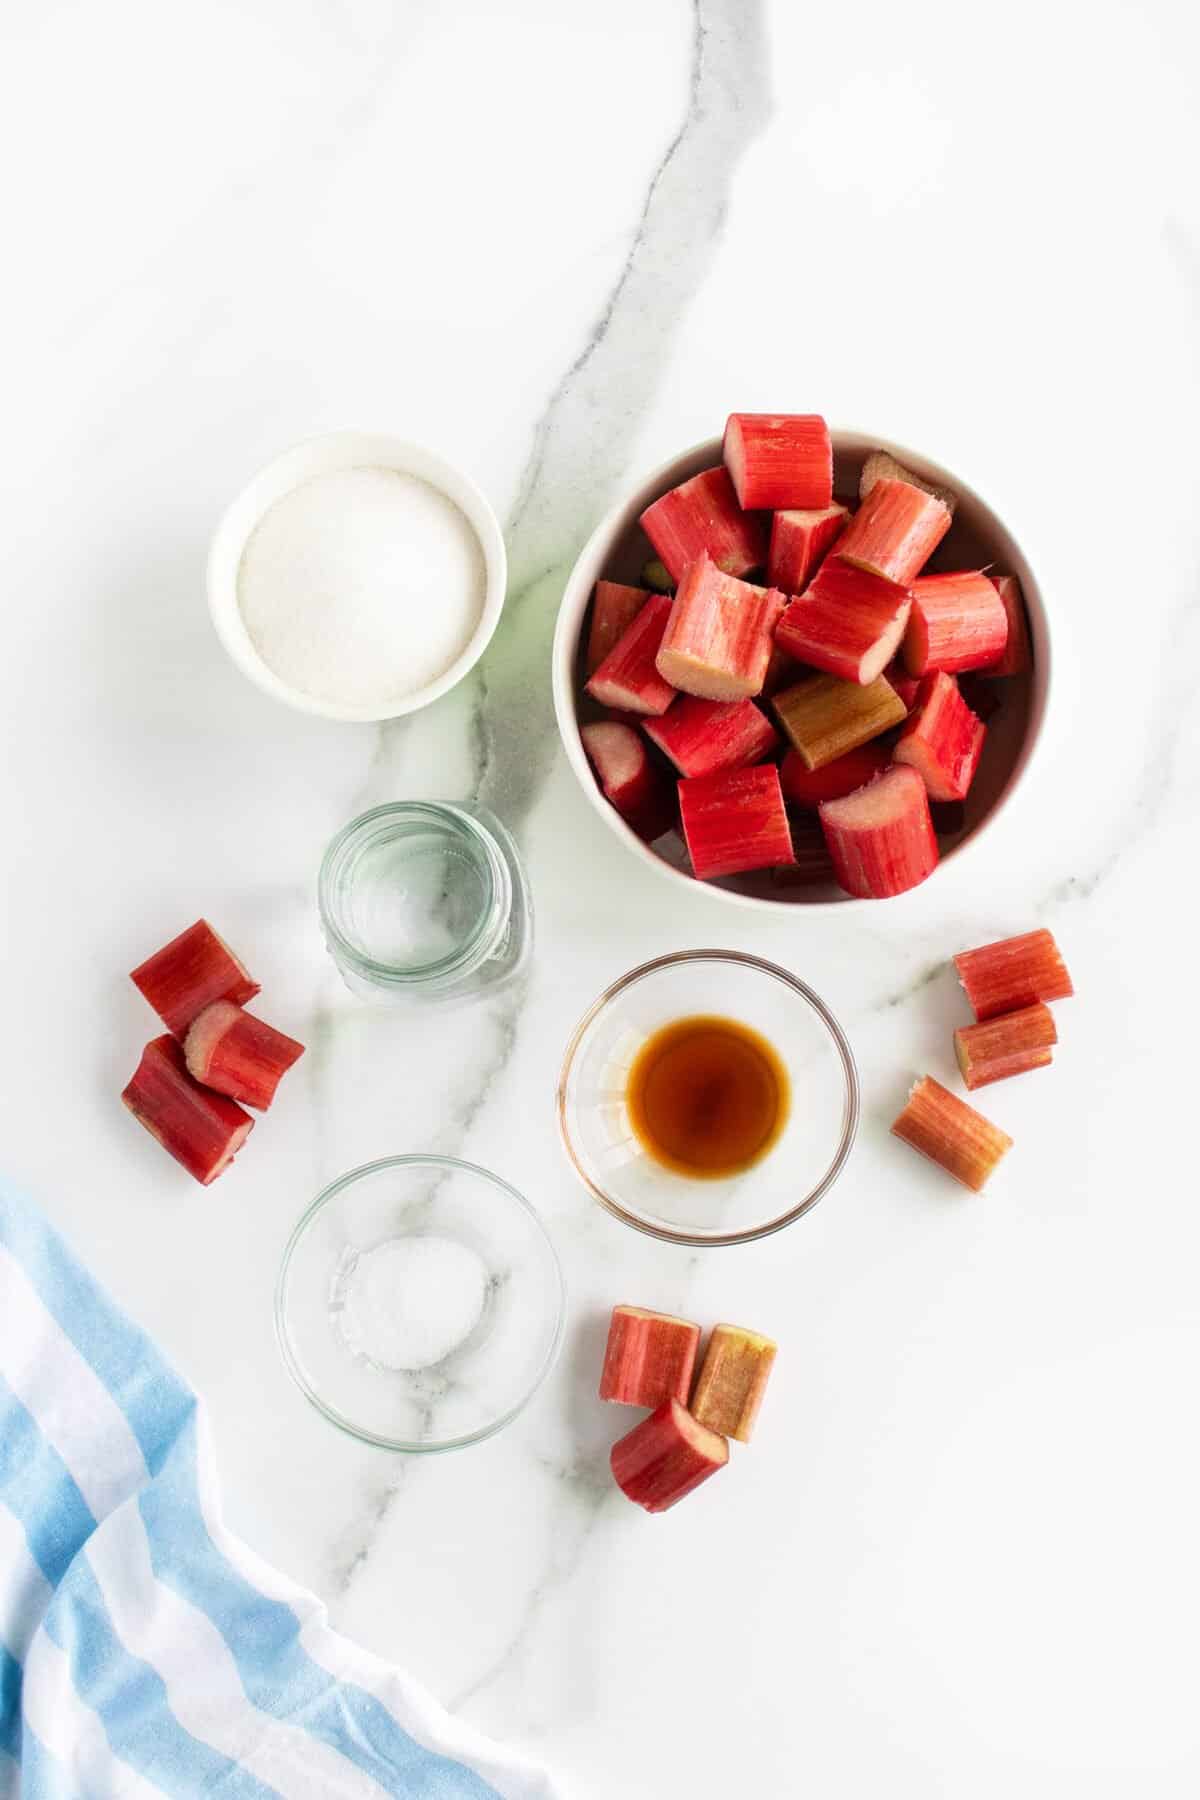 Rhubarb Sauce ingredients on a marble surface